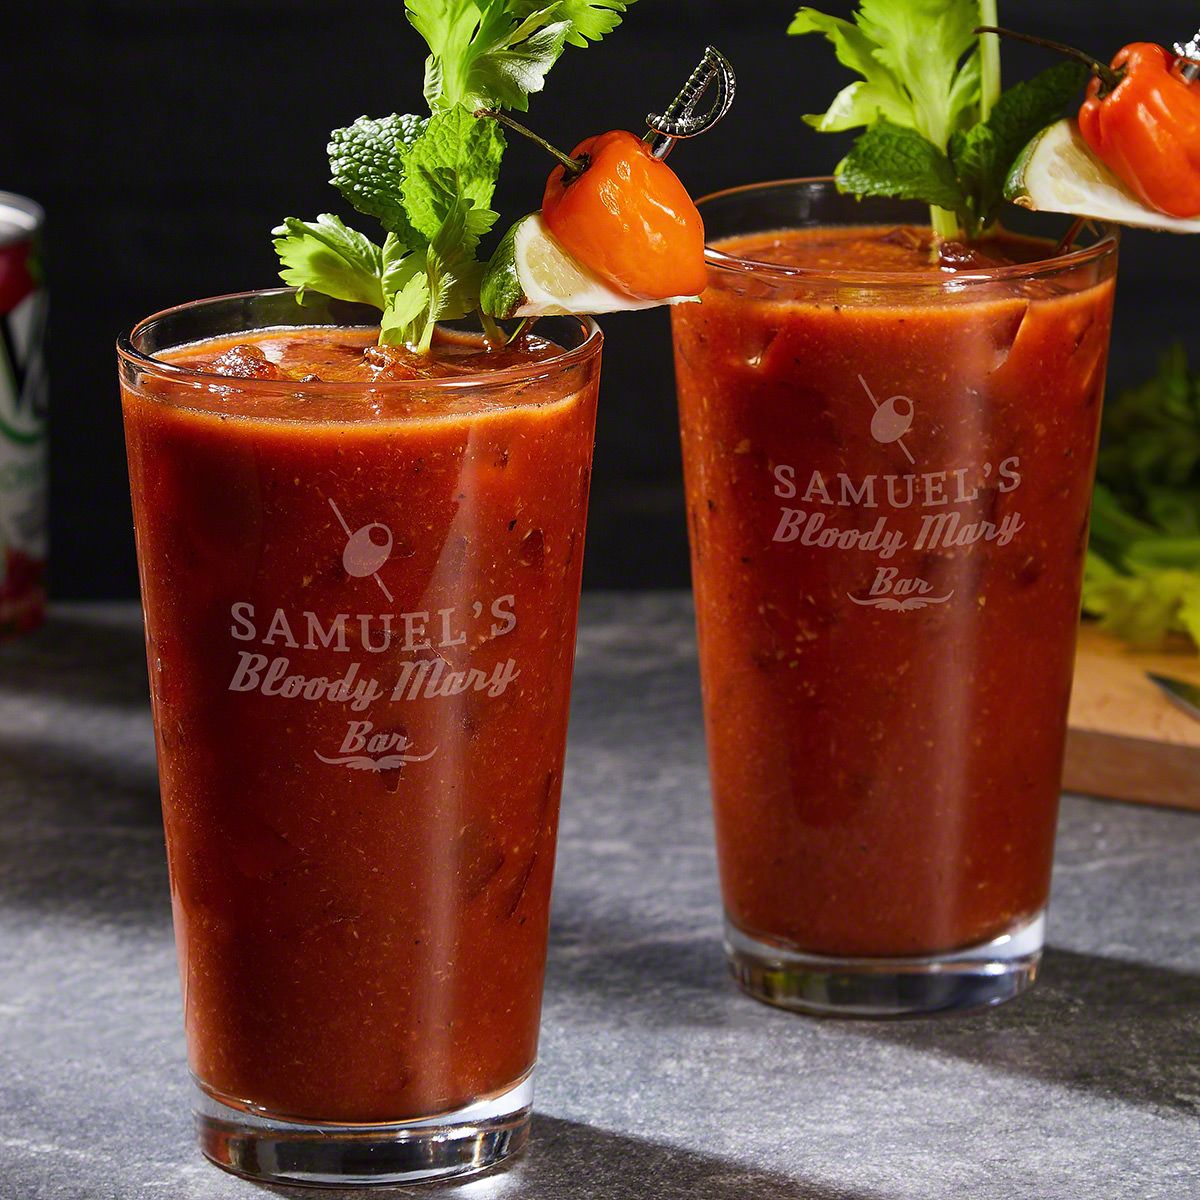 https://images.homewetbar.com/media/catalog/product/7/5/7575-bloody-mary-brunch-glass-set.jpg?store=default&image-type=image